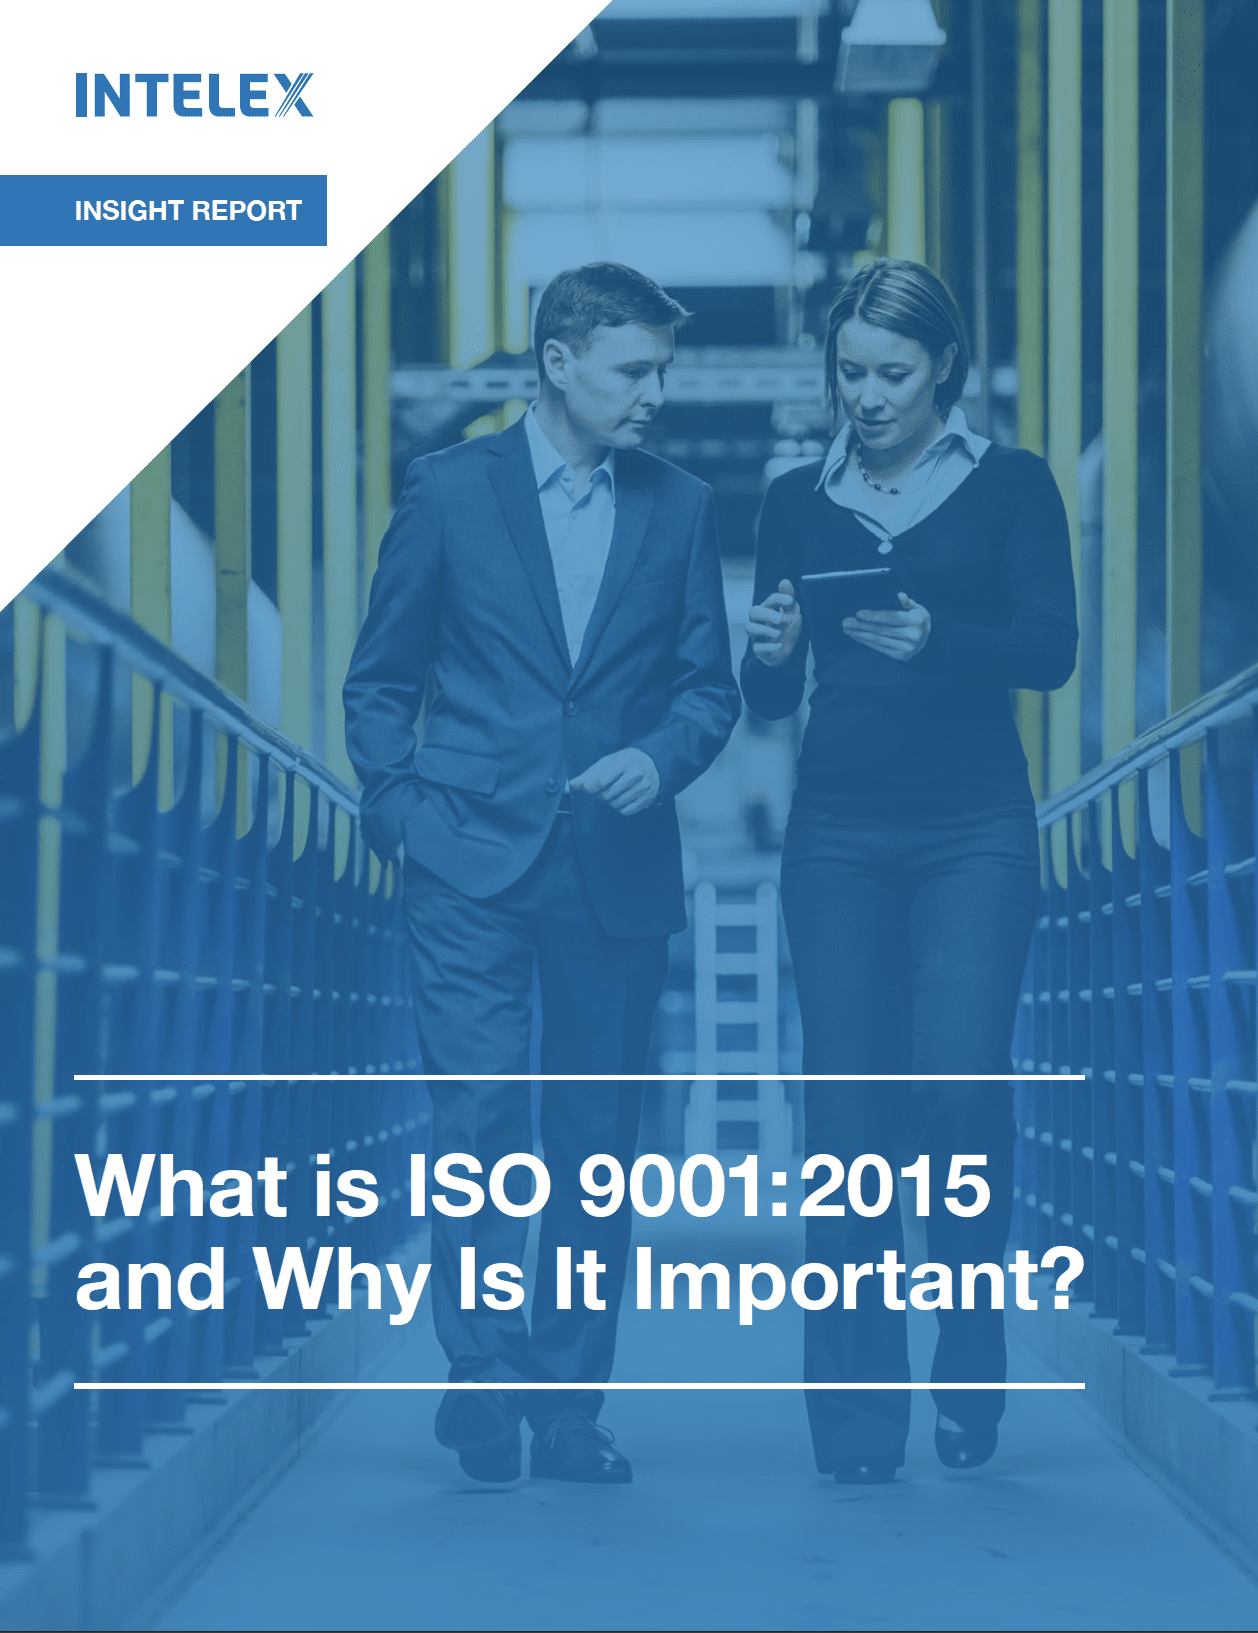 What is ISO 9001:2015 and Why Is It Important